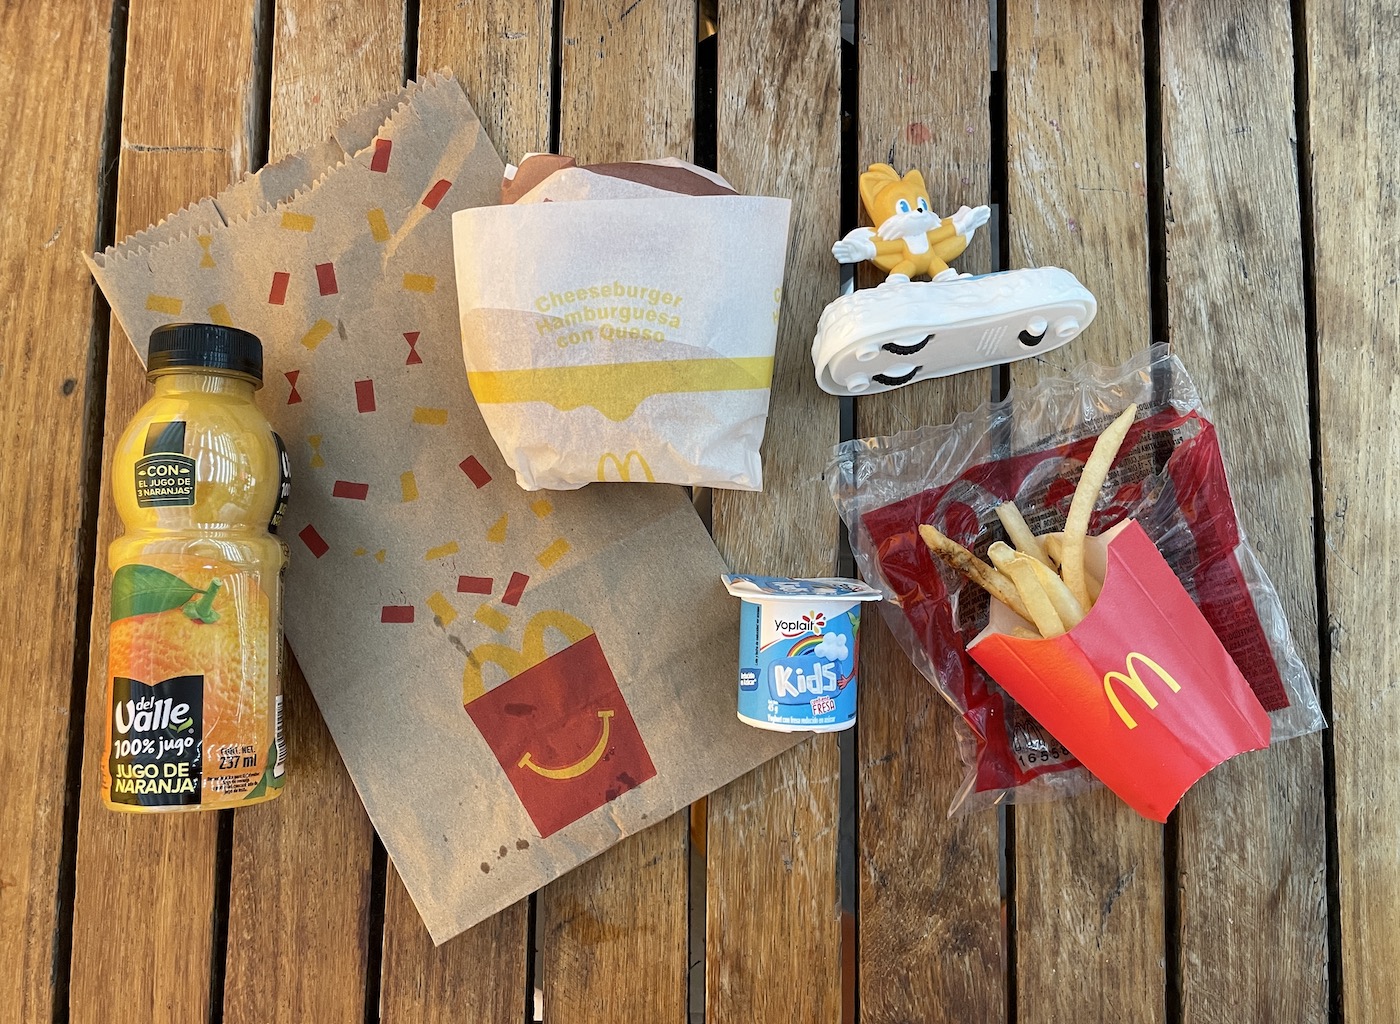 McDonalds Happy Meal from Mexico City